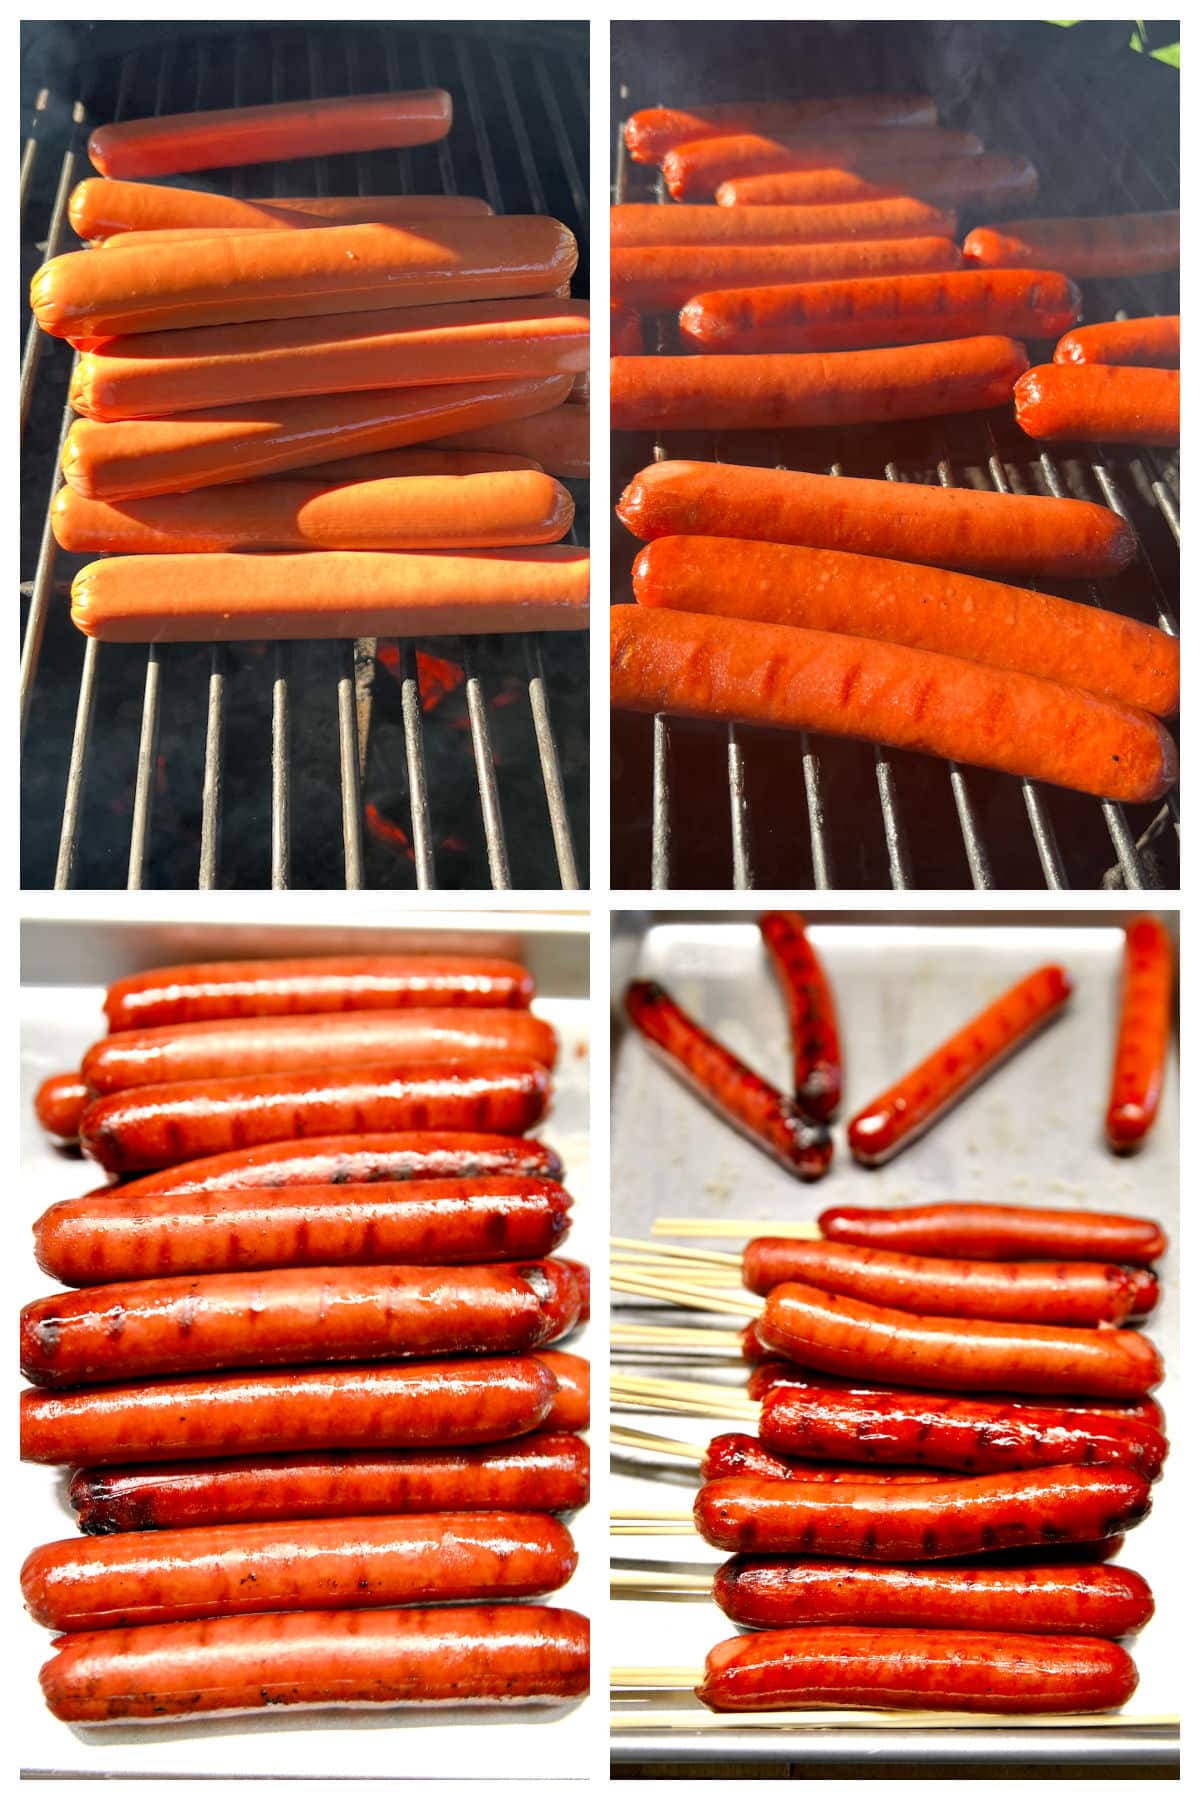 Grilling hot dogs collage, adding skewers for corn dog sticks.